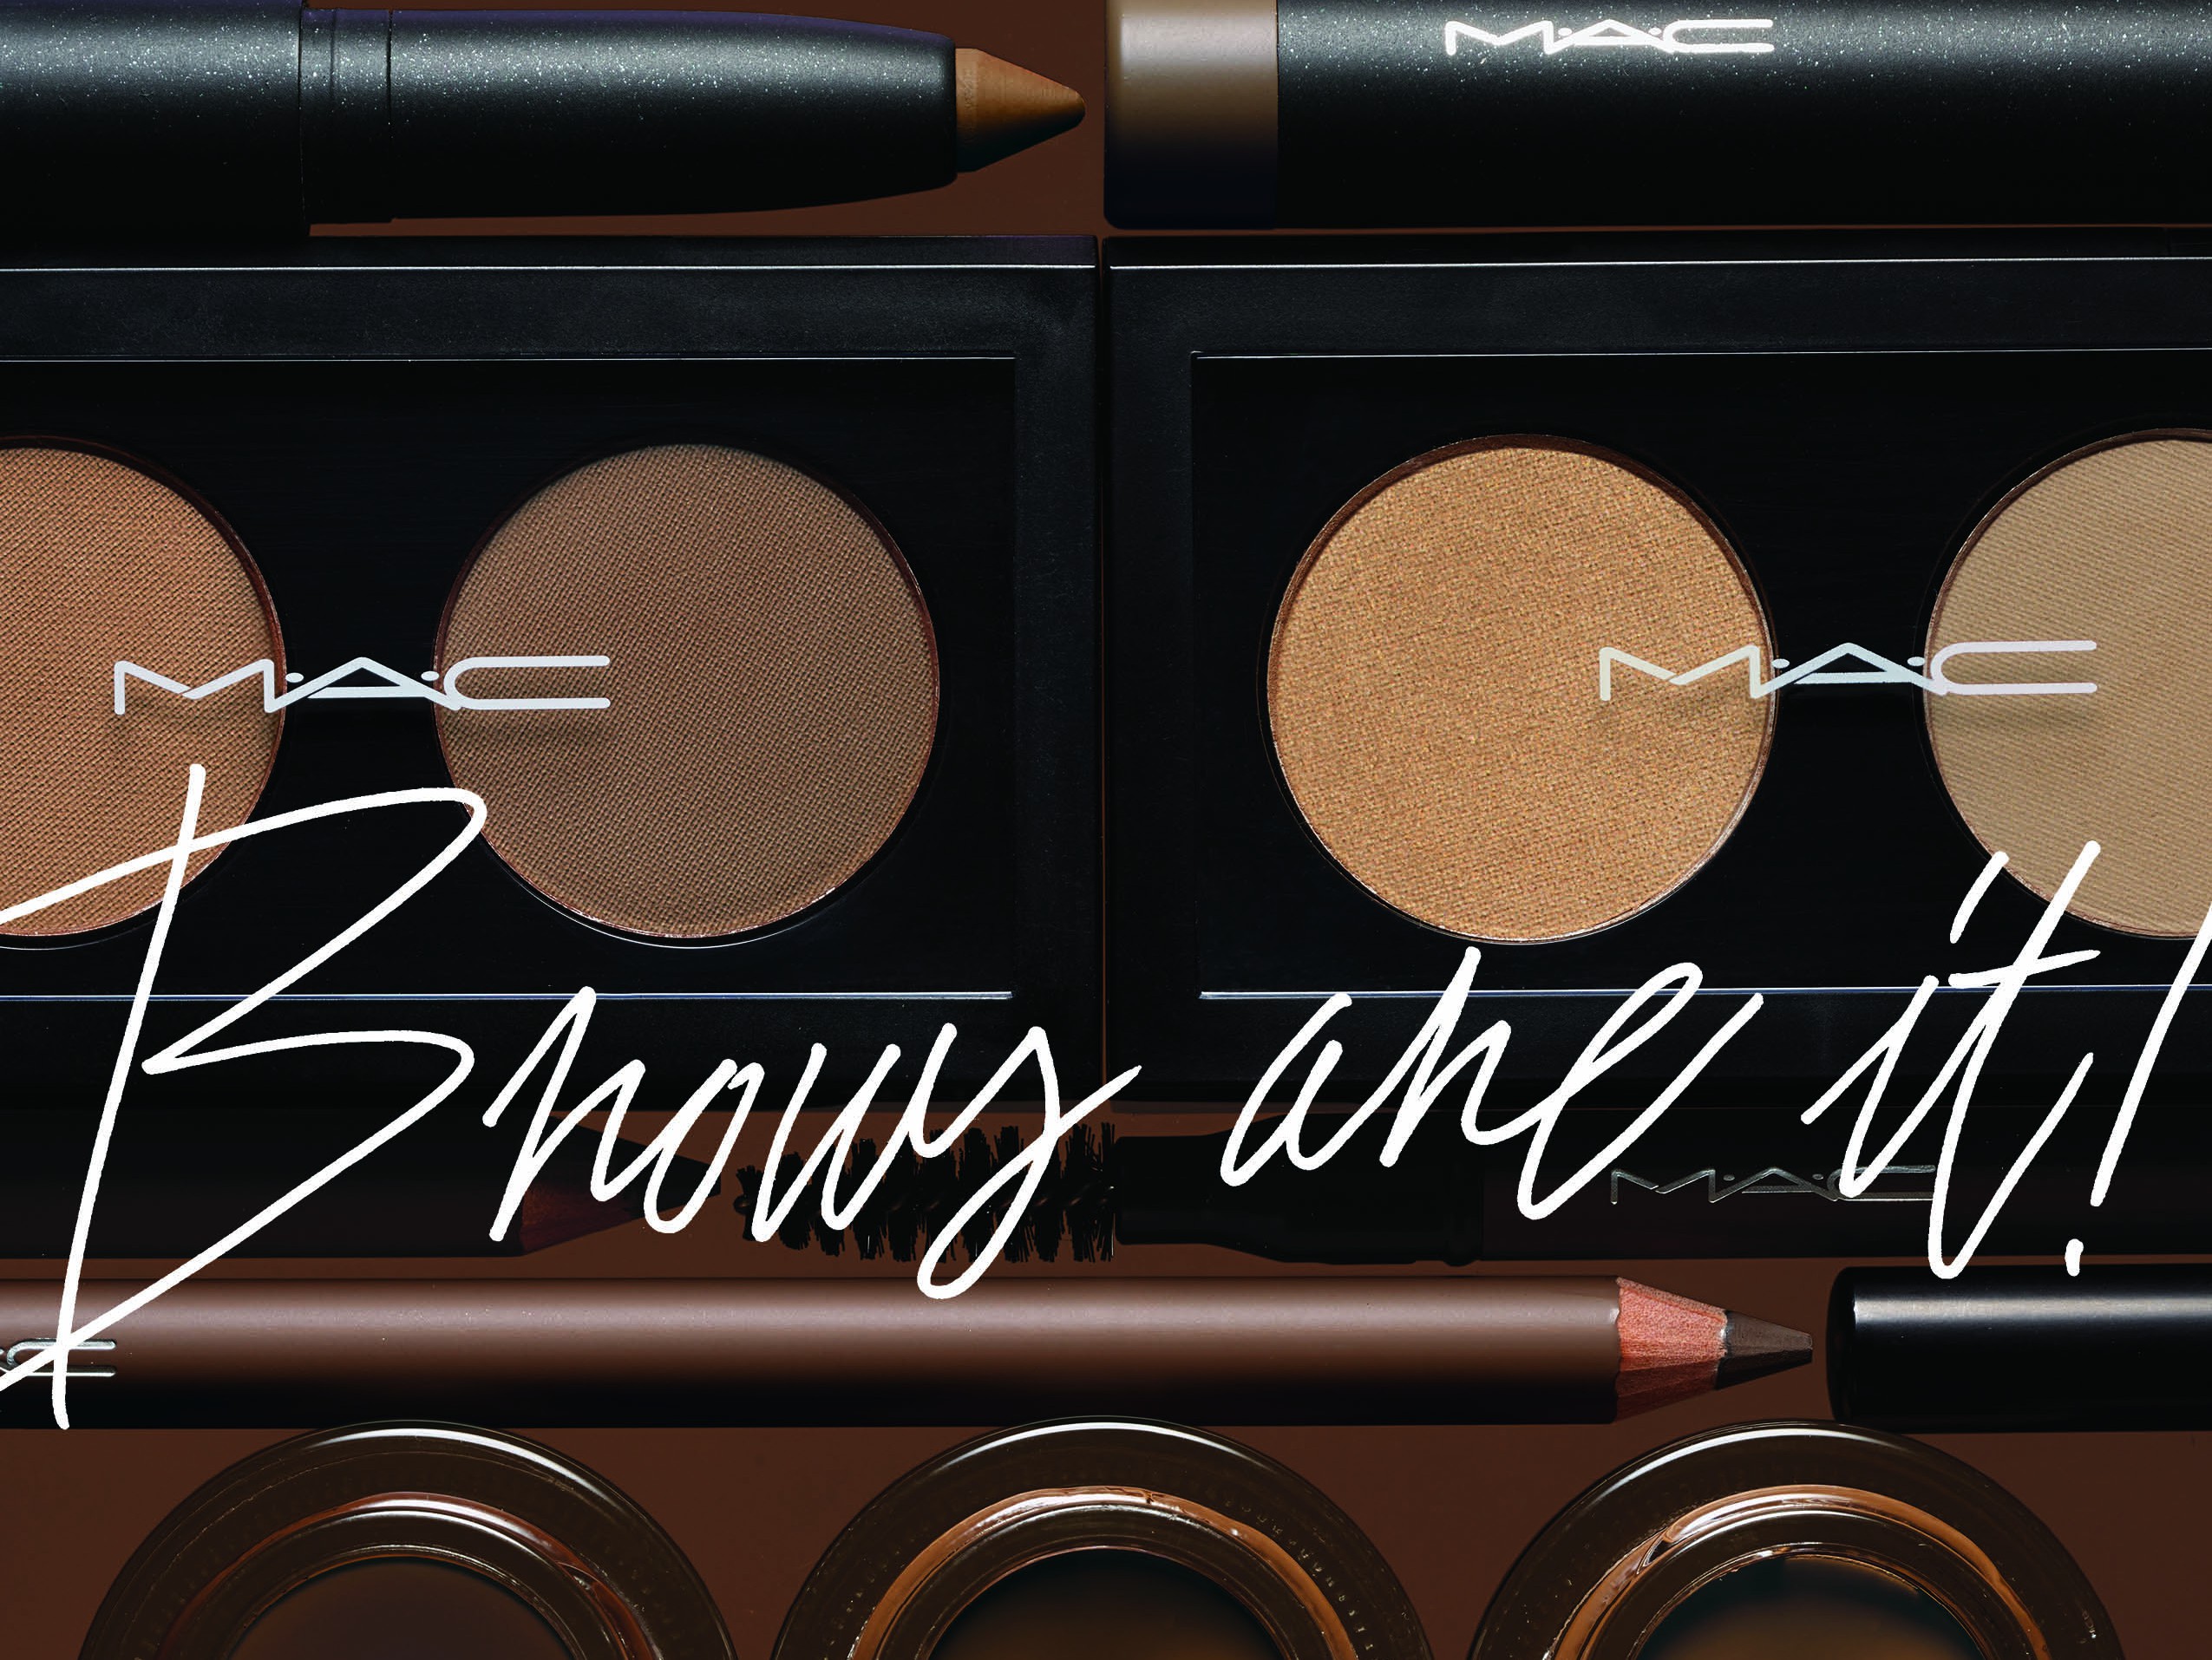 Brows rule, says M.A.C Cosmetics